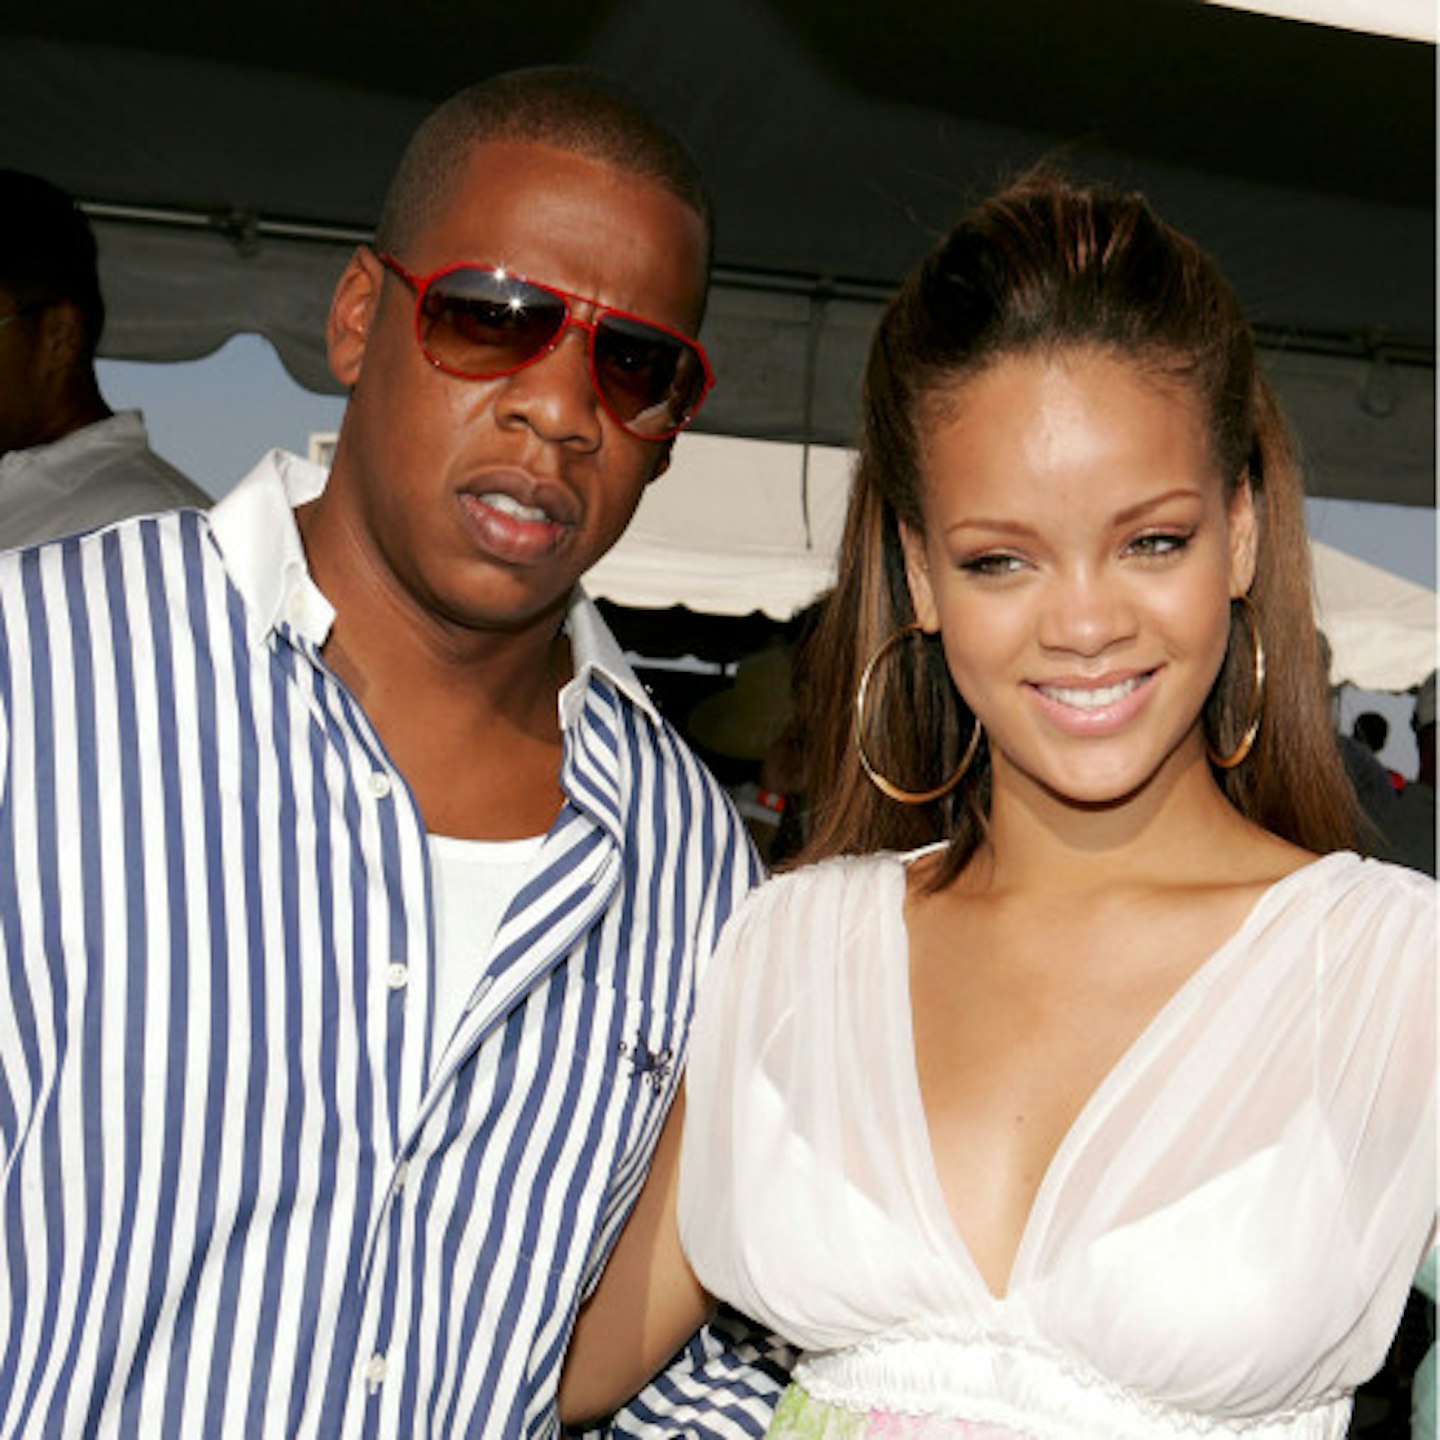 Jay and Rihanna have worked together since the beginning of her career in 2005